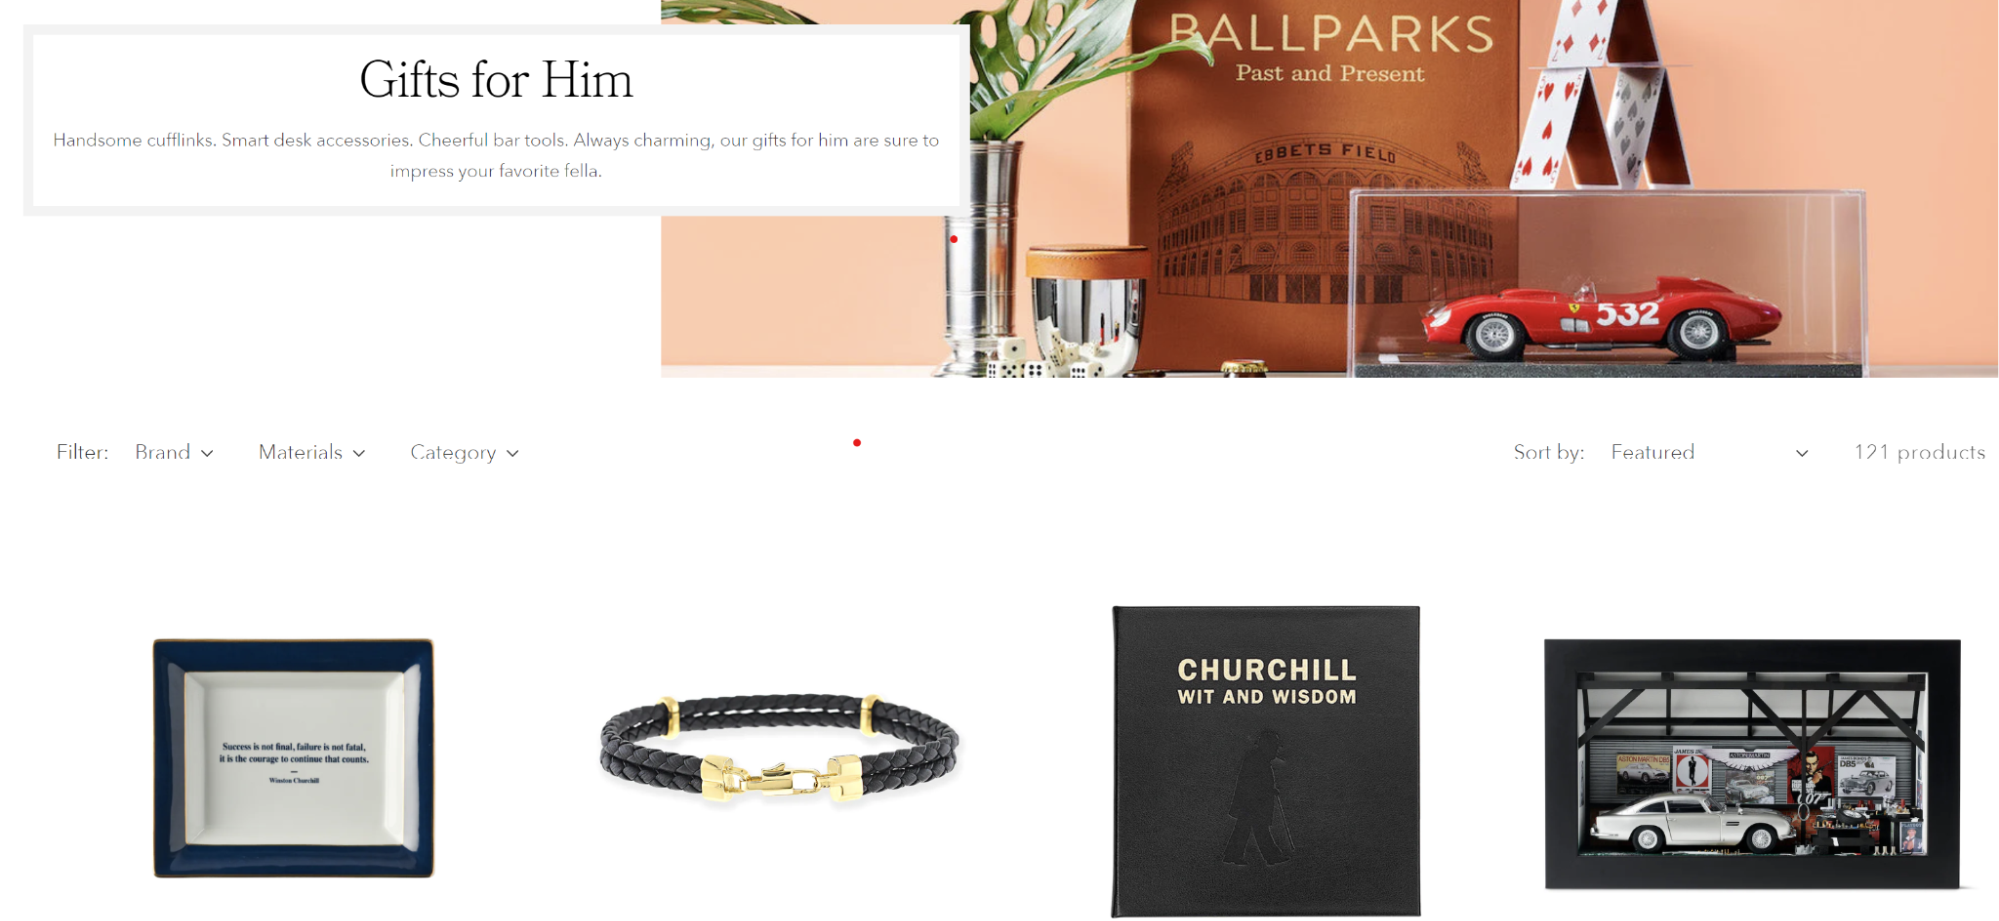 example of a gift guide for men from Gumps in San Fran